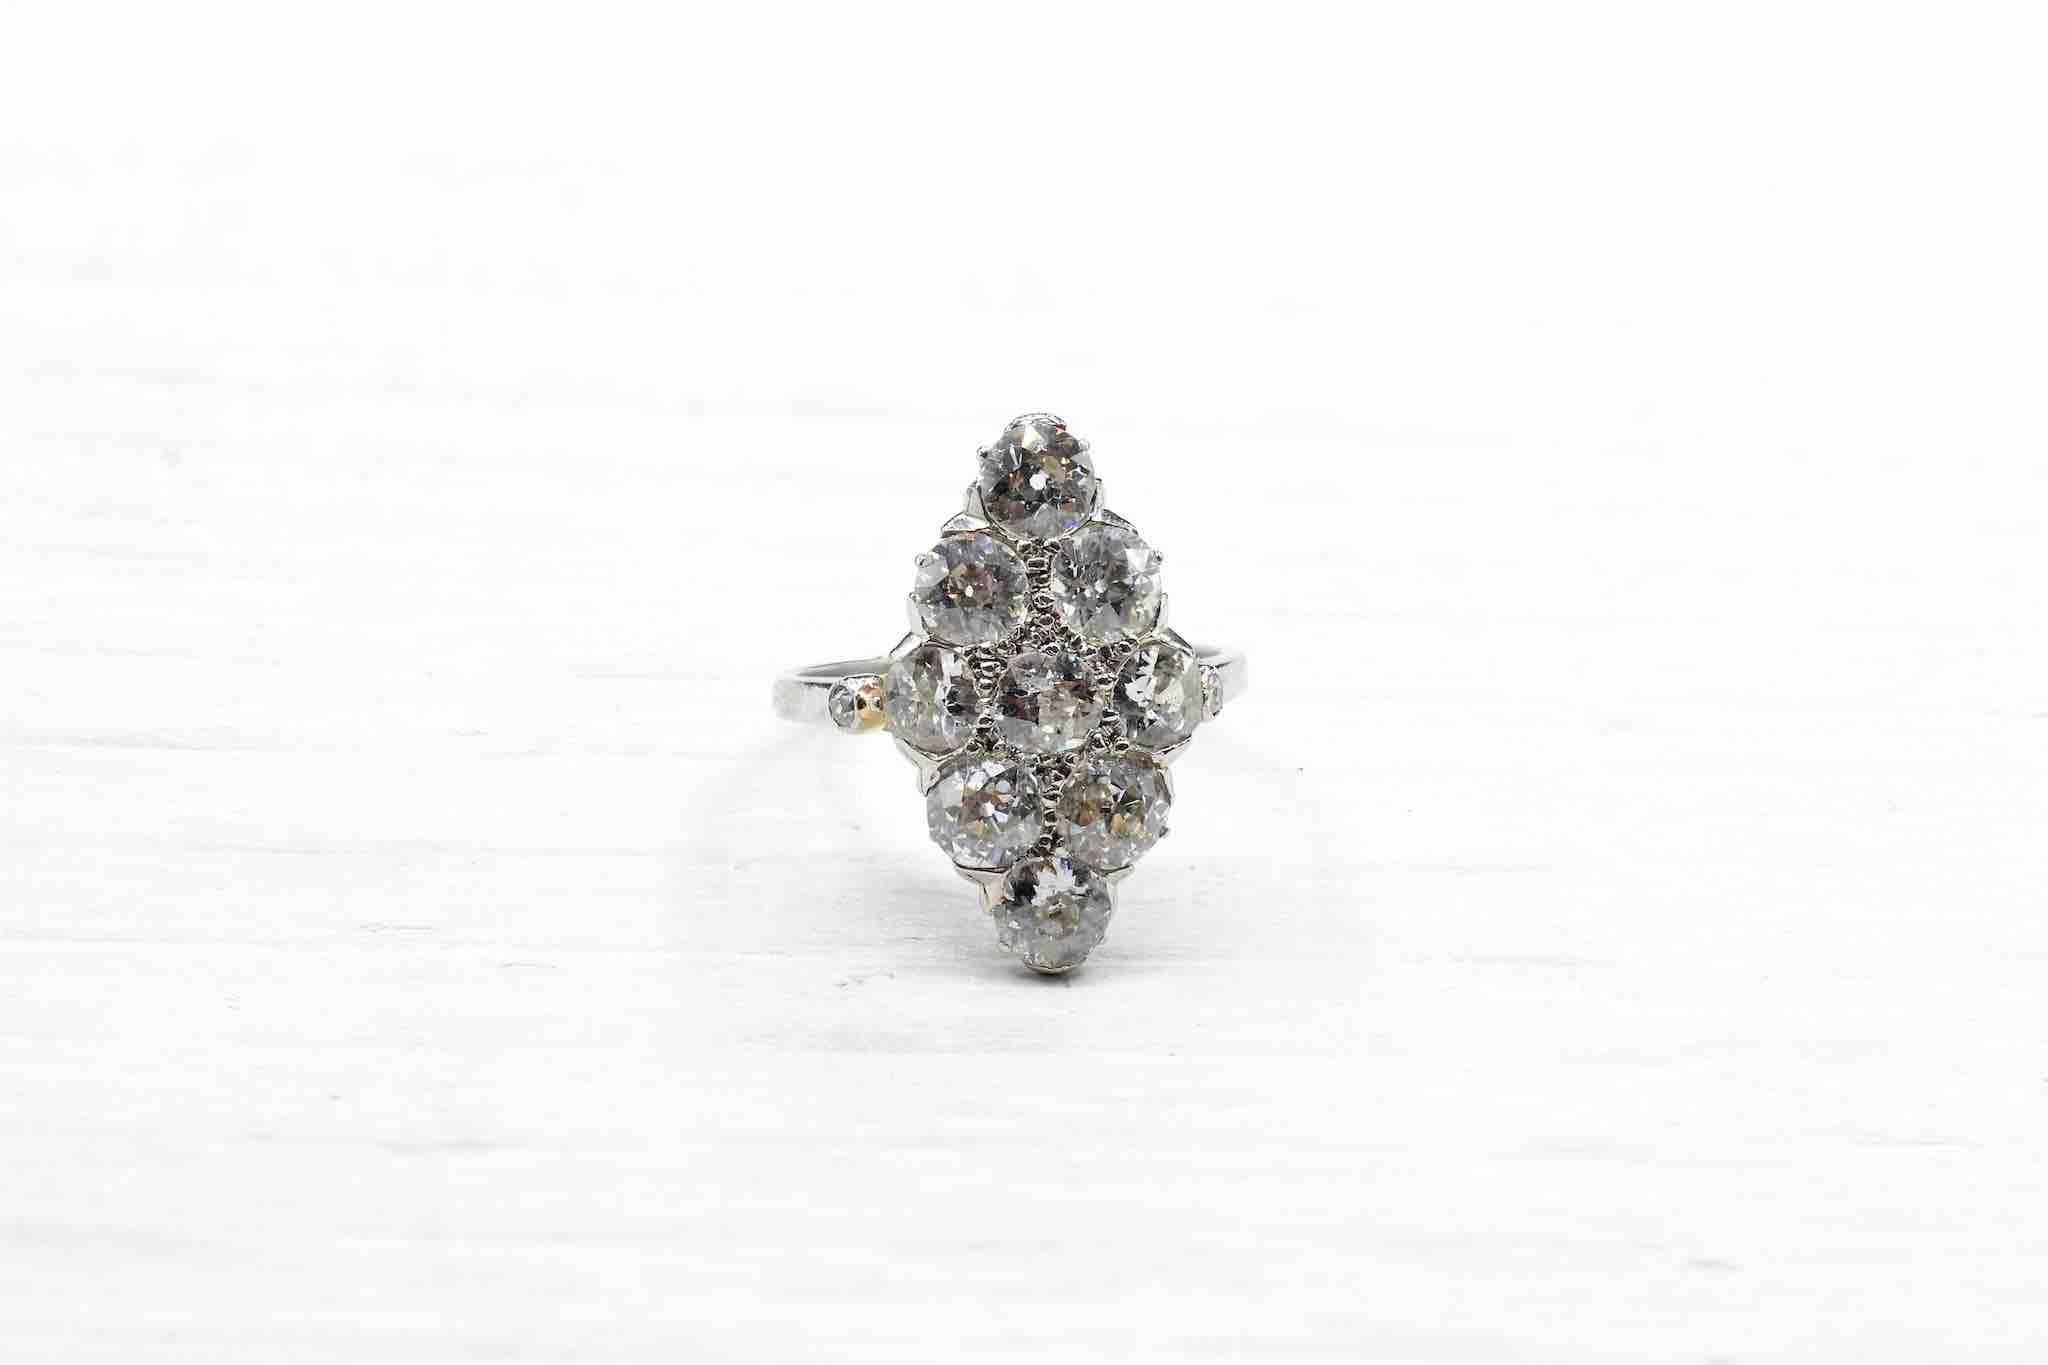 Stones: Brilliant cut diamonds for a total weight of 2.27 carats
Material: platinum
Dimensions: 19 mm length on finger
Weight: 3.3g
Size: 48 (free sizing)
Certificate
Ref. : 22061